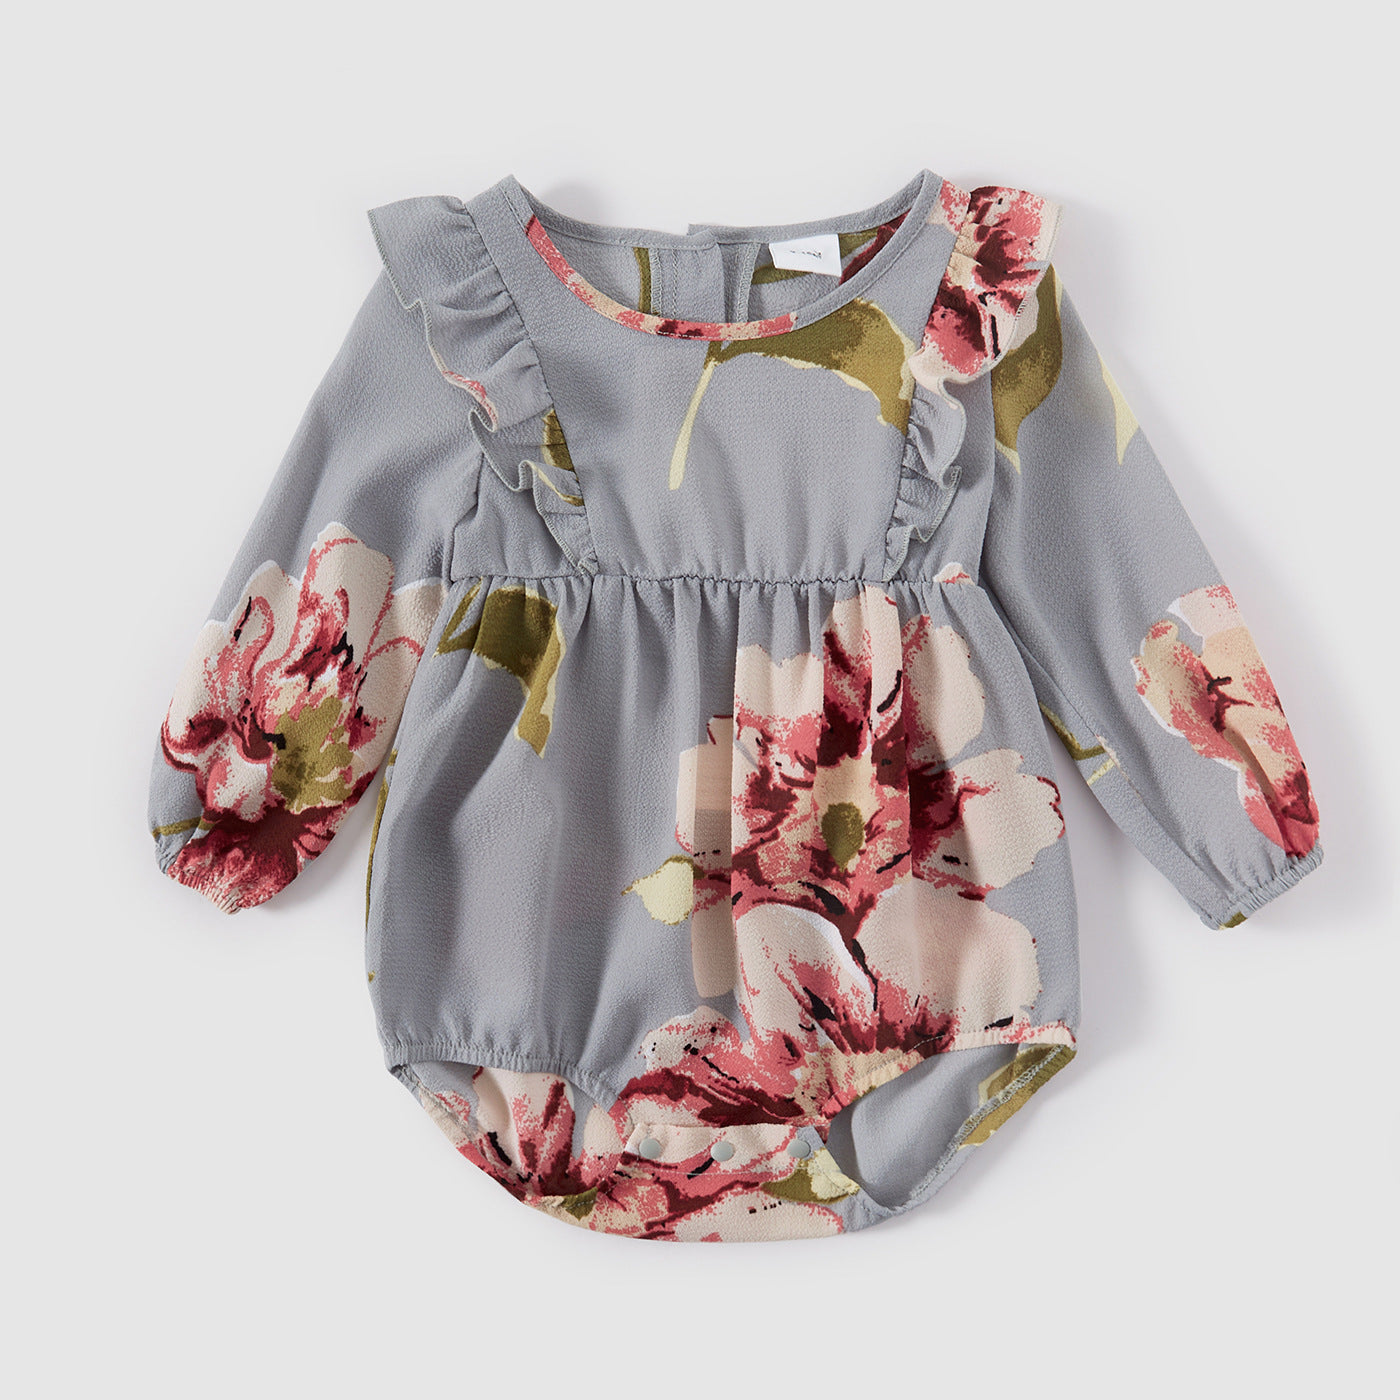 All Over Floral Print Ruffle Long-sleeve Belted Dress for Mom and Me